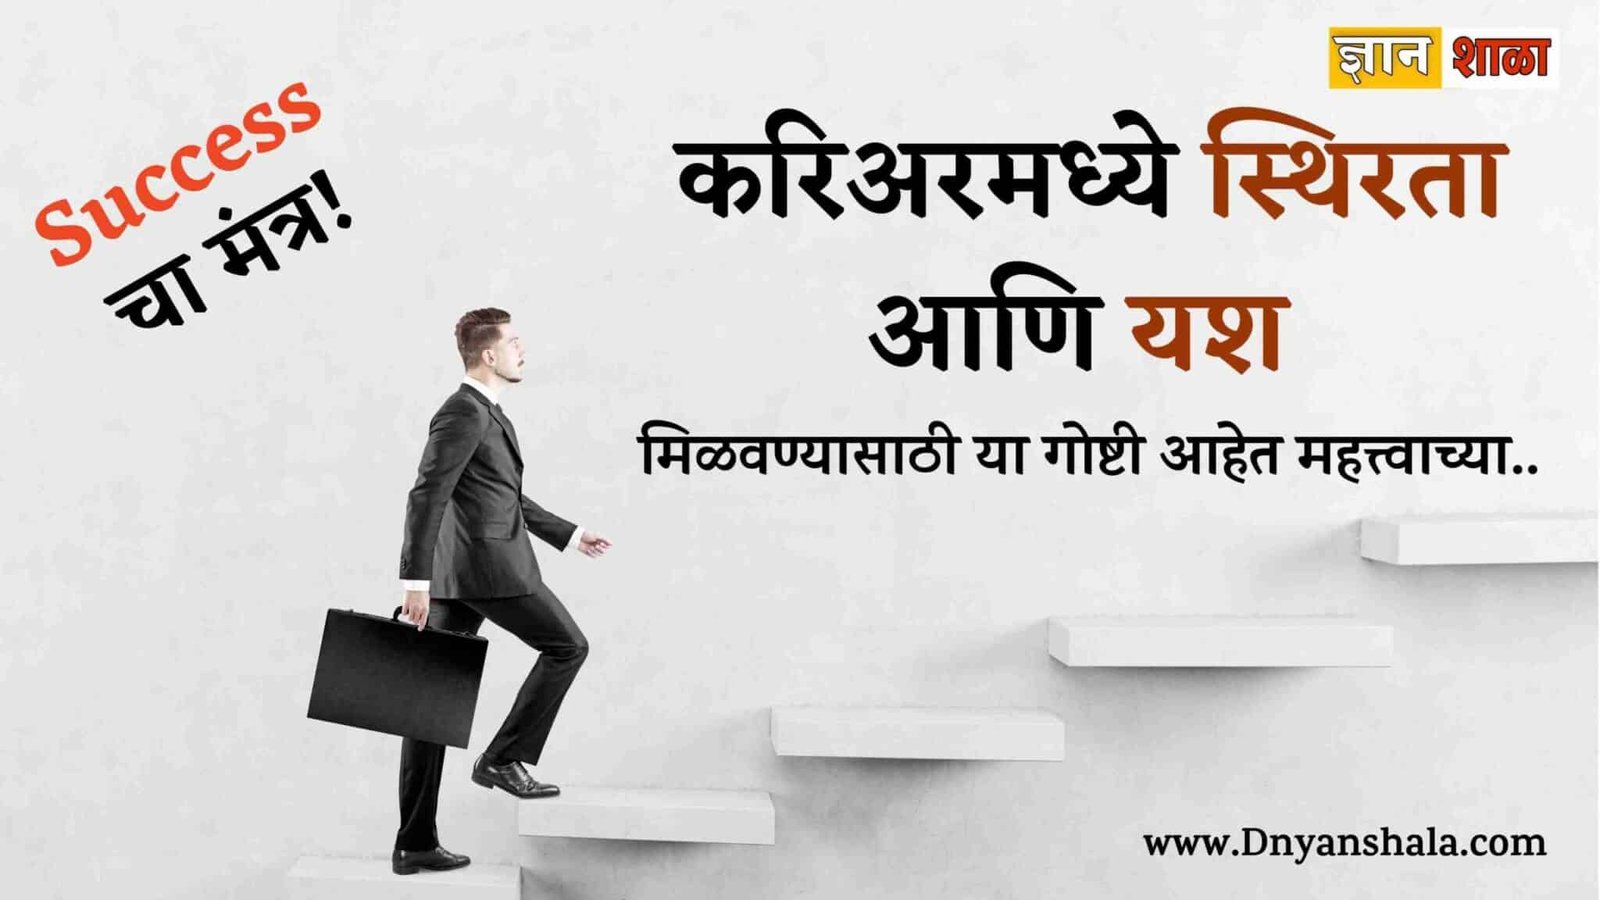 How to become successful life in marathi